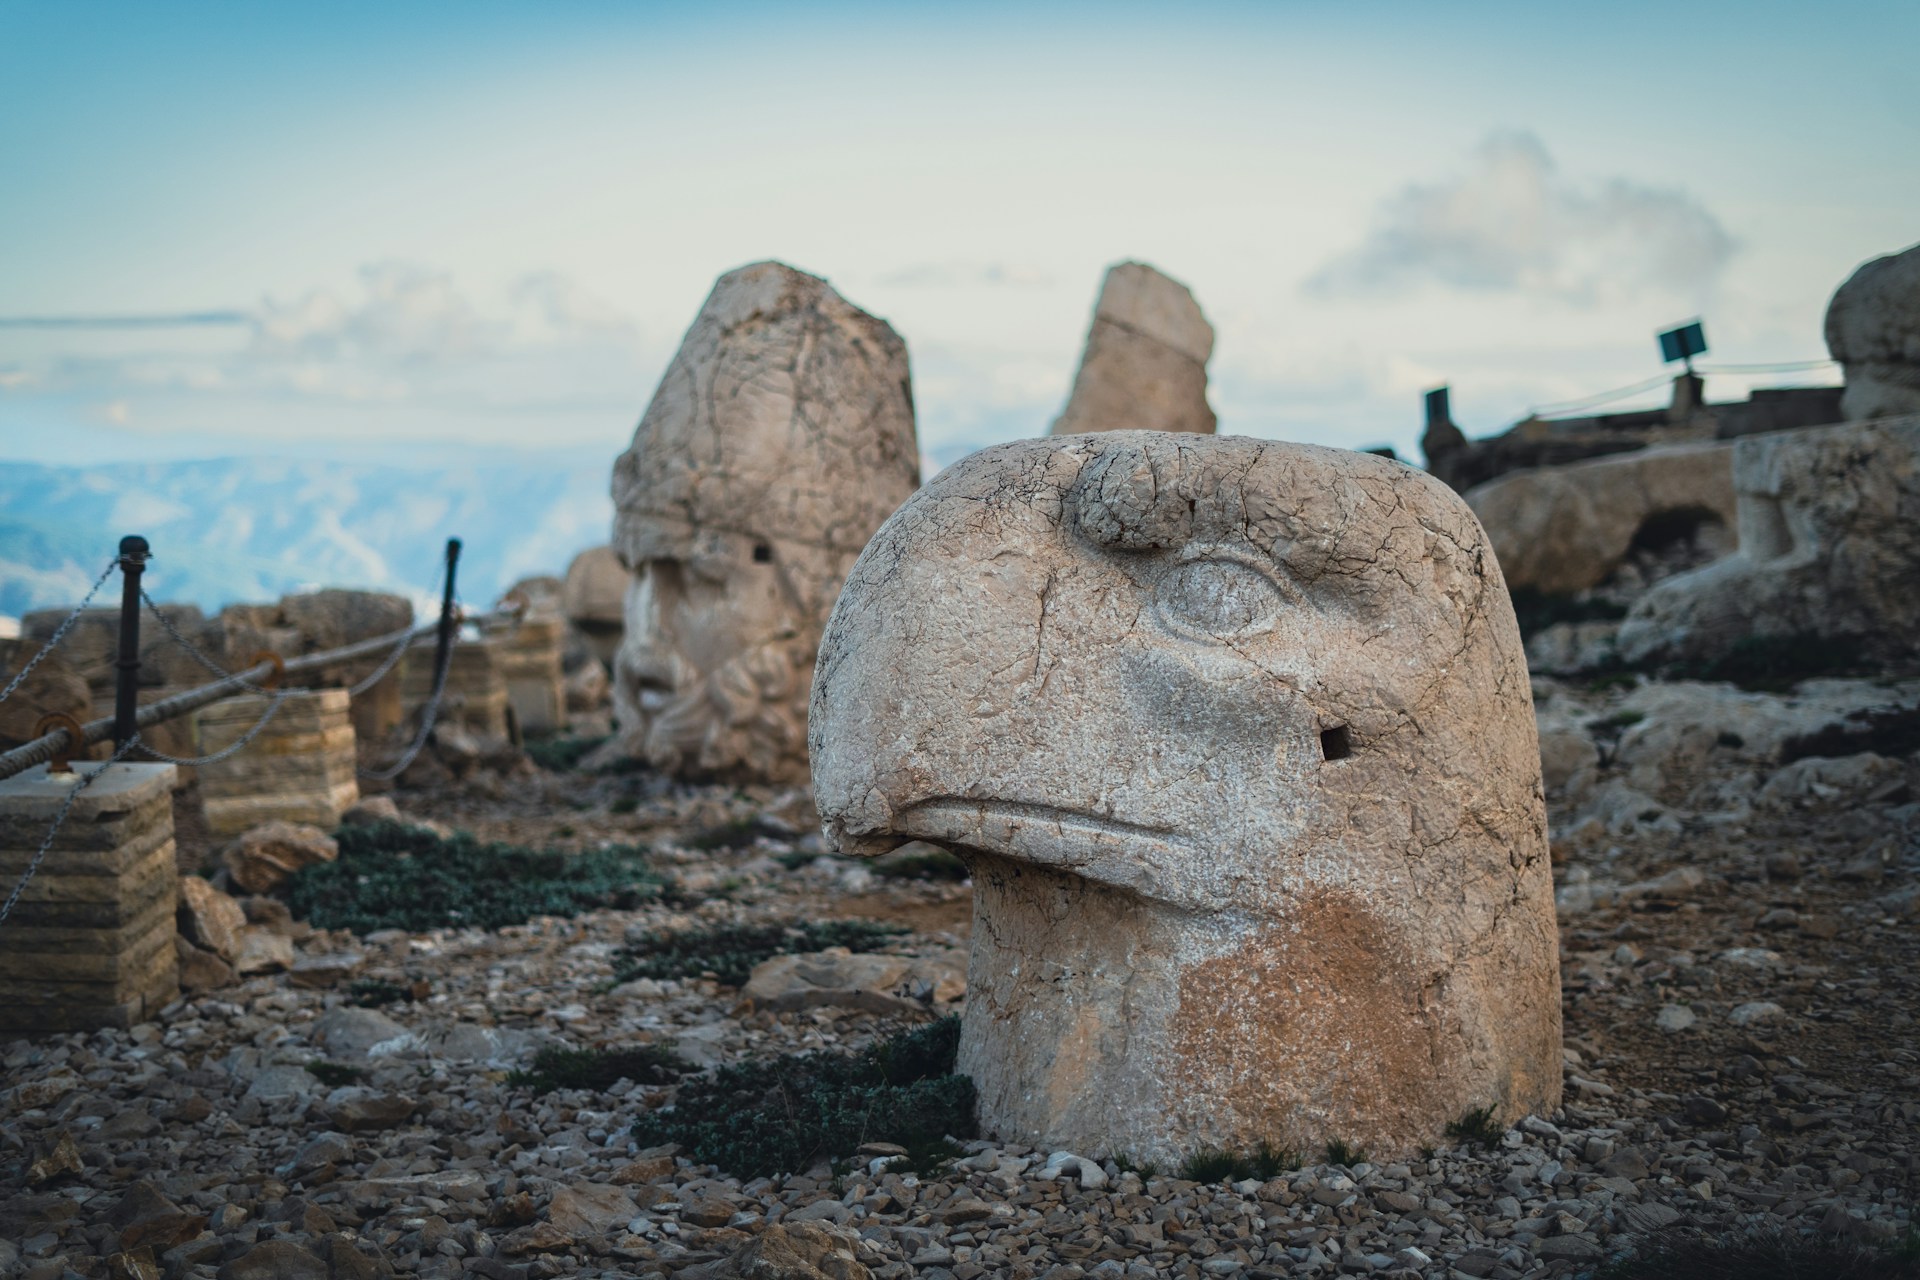 <p>Located in the ancient Mount Nemrut National Park, this peak features colossal statues and tomb shrines built by King Antiochus I of Commagene. Both history and nature lovers can eat their hearts out in this place.</p> <p>Picture: Ümit Yıldırım / Unsplash</p>